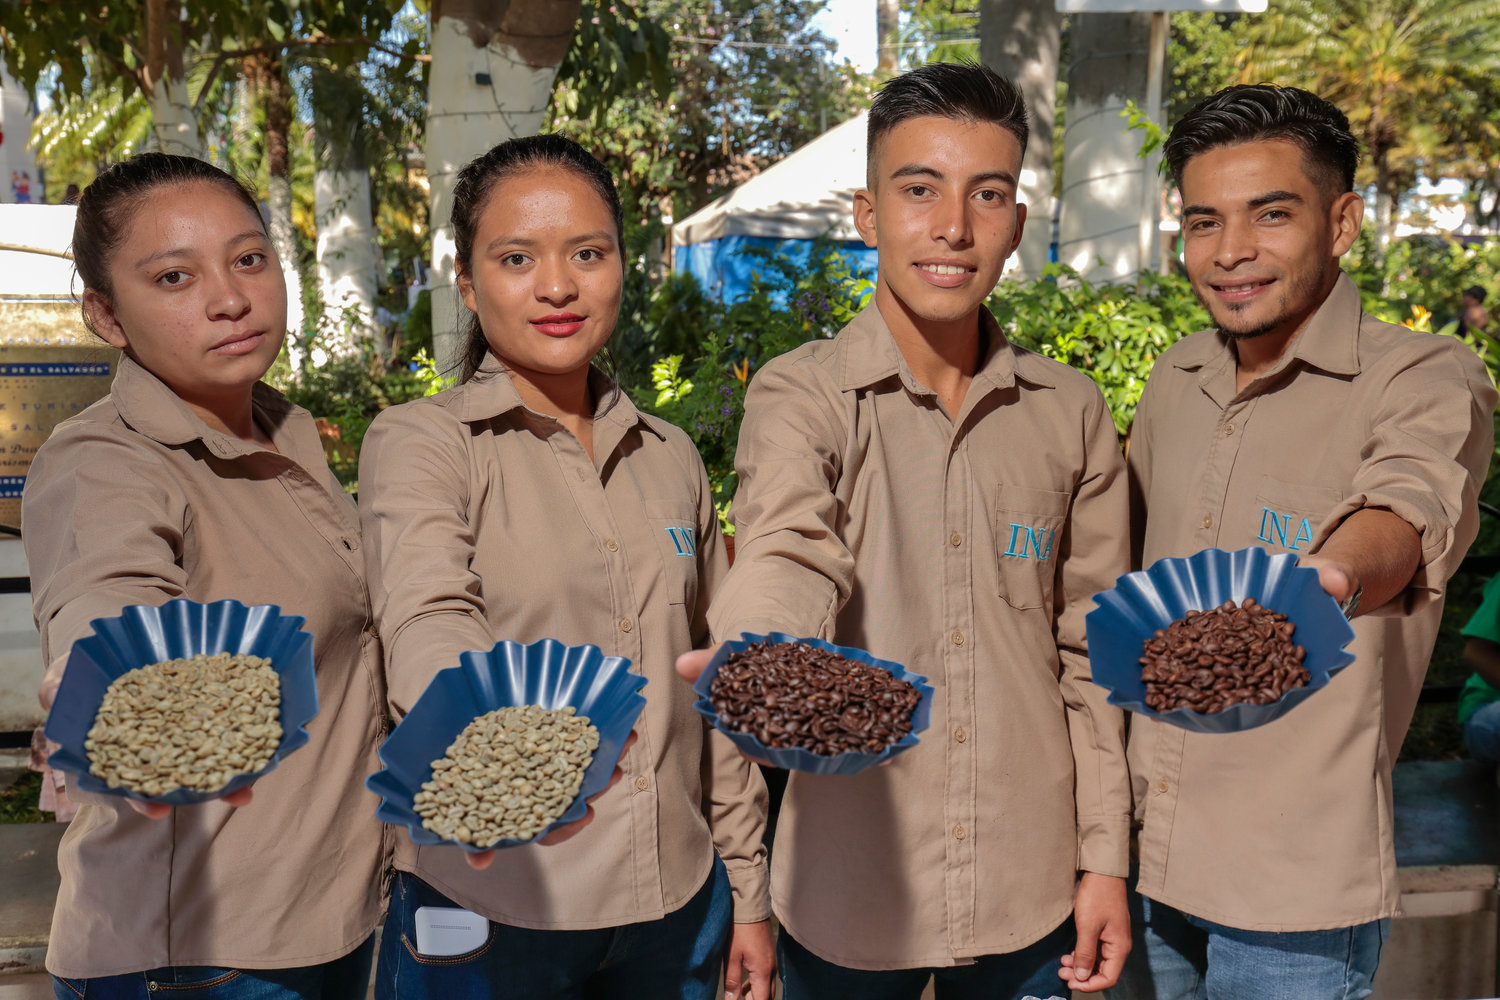 Ana Gladys Joachin Paredes, 20, Laura Vanessa Gonzolez Zuniga, 16, Edwin Carlos Calvio, 16, and Jorge Humberto Chiguila Portillo, 24, are students from the Agriculture Baccalaureate program of Luis Reynaldo Tobar Public High School, which has revived the Agriculture Baccalaureate program with the help of CRS and their partners.